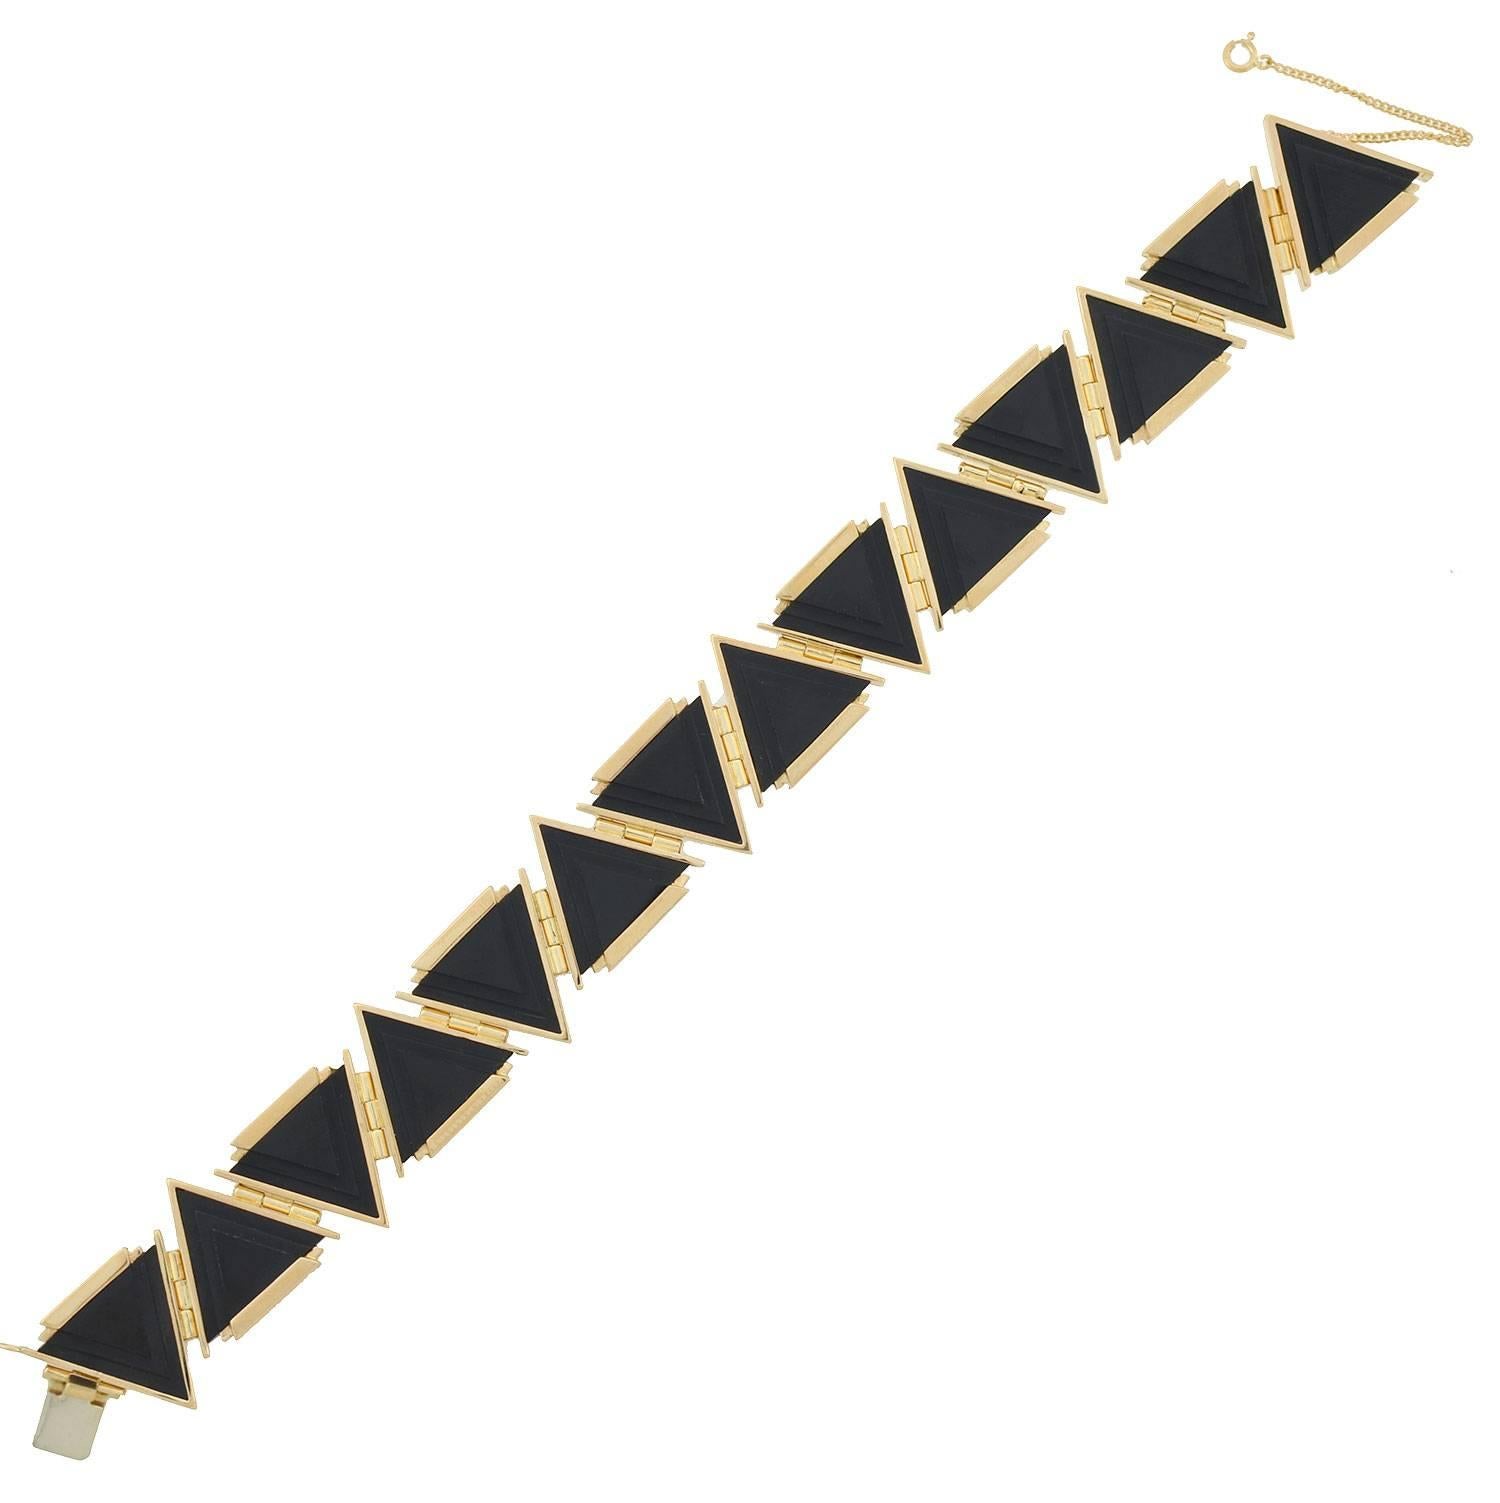 A fabulous and unusual onyx link bracelet from the late Art Deco (circa 1930s) era! This gorgeous piece features 14 triangular shaped onyx stones which are set in 14kt rose gold. The onyx stones have a carved surface with an attractive 3-step tiered